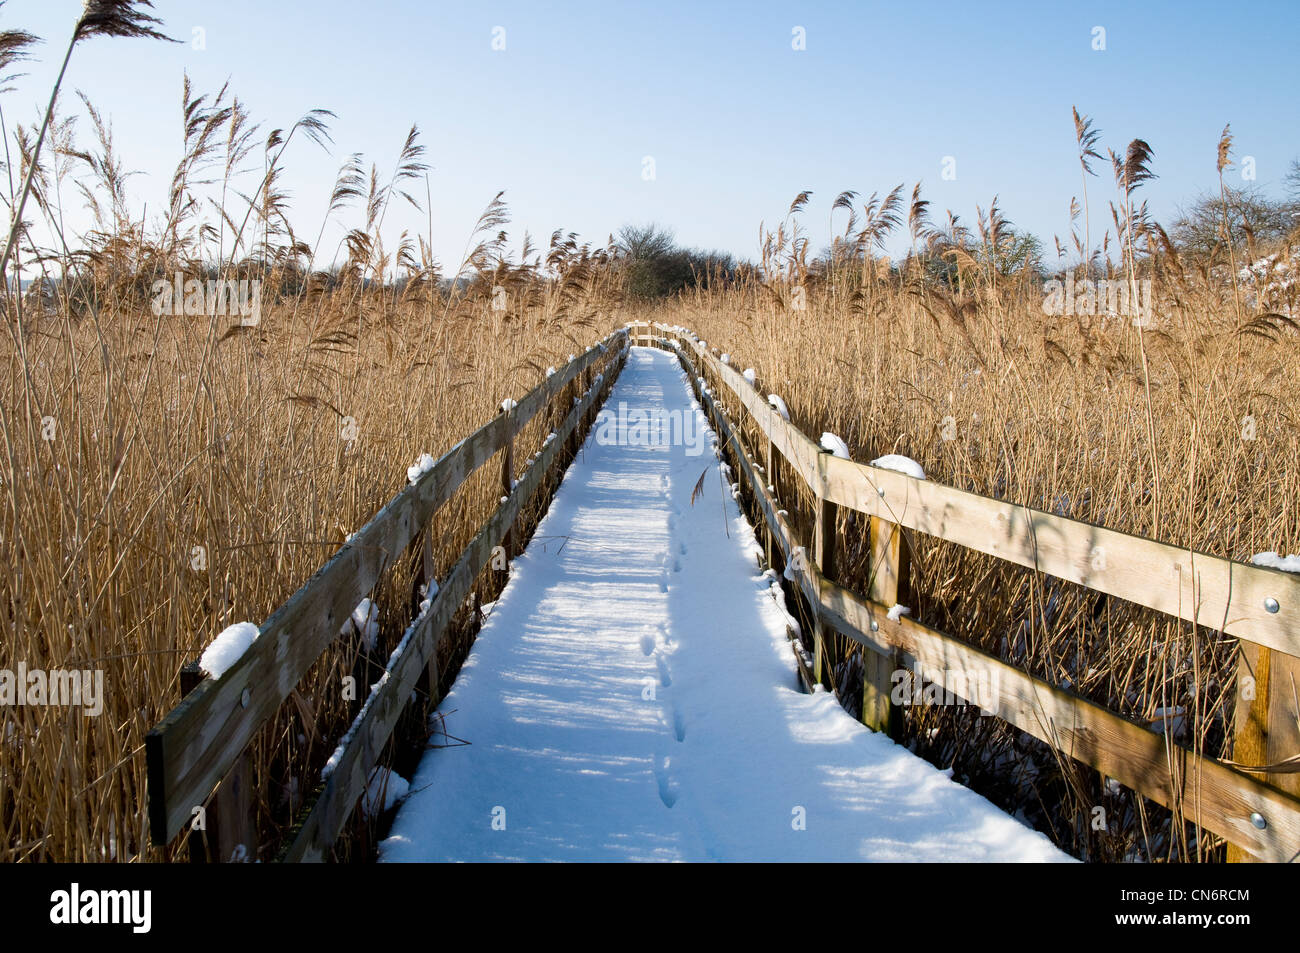 Fox footprints in the snow covering the reedbed boardwalk at Crossness Nature Reserve, Bexley, Kent. February. Stock Photo